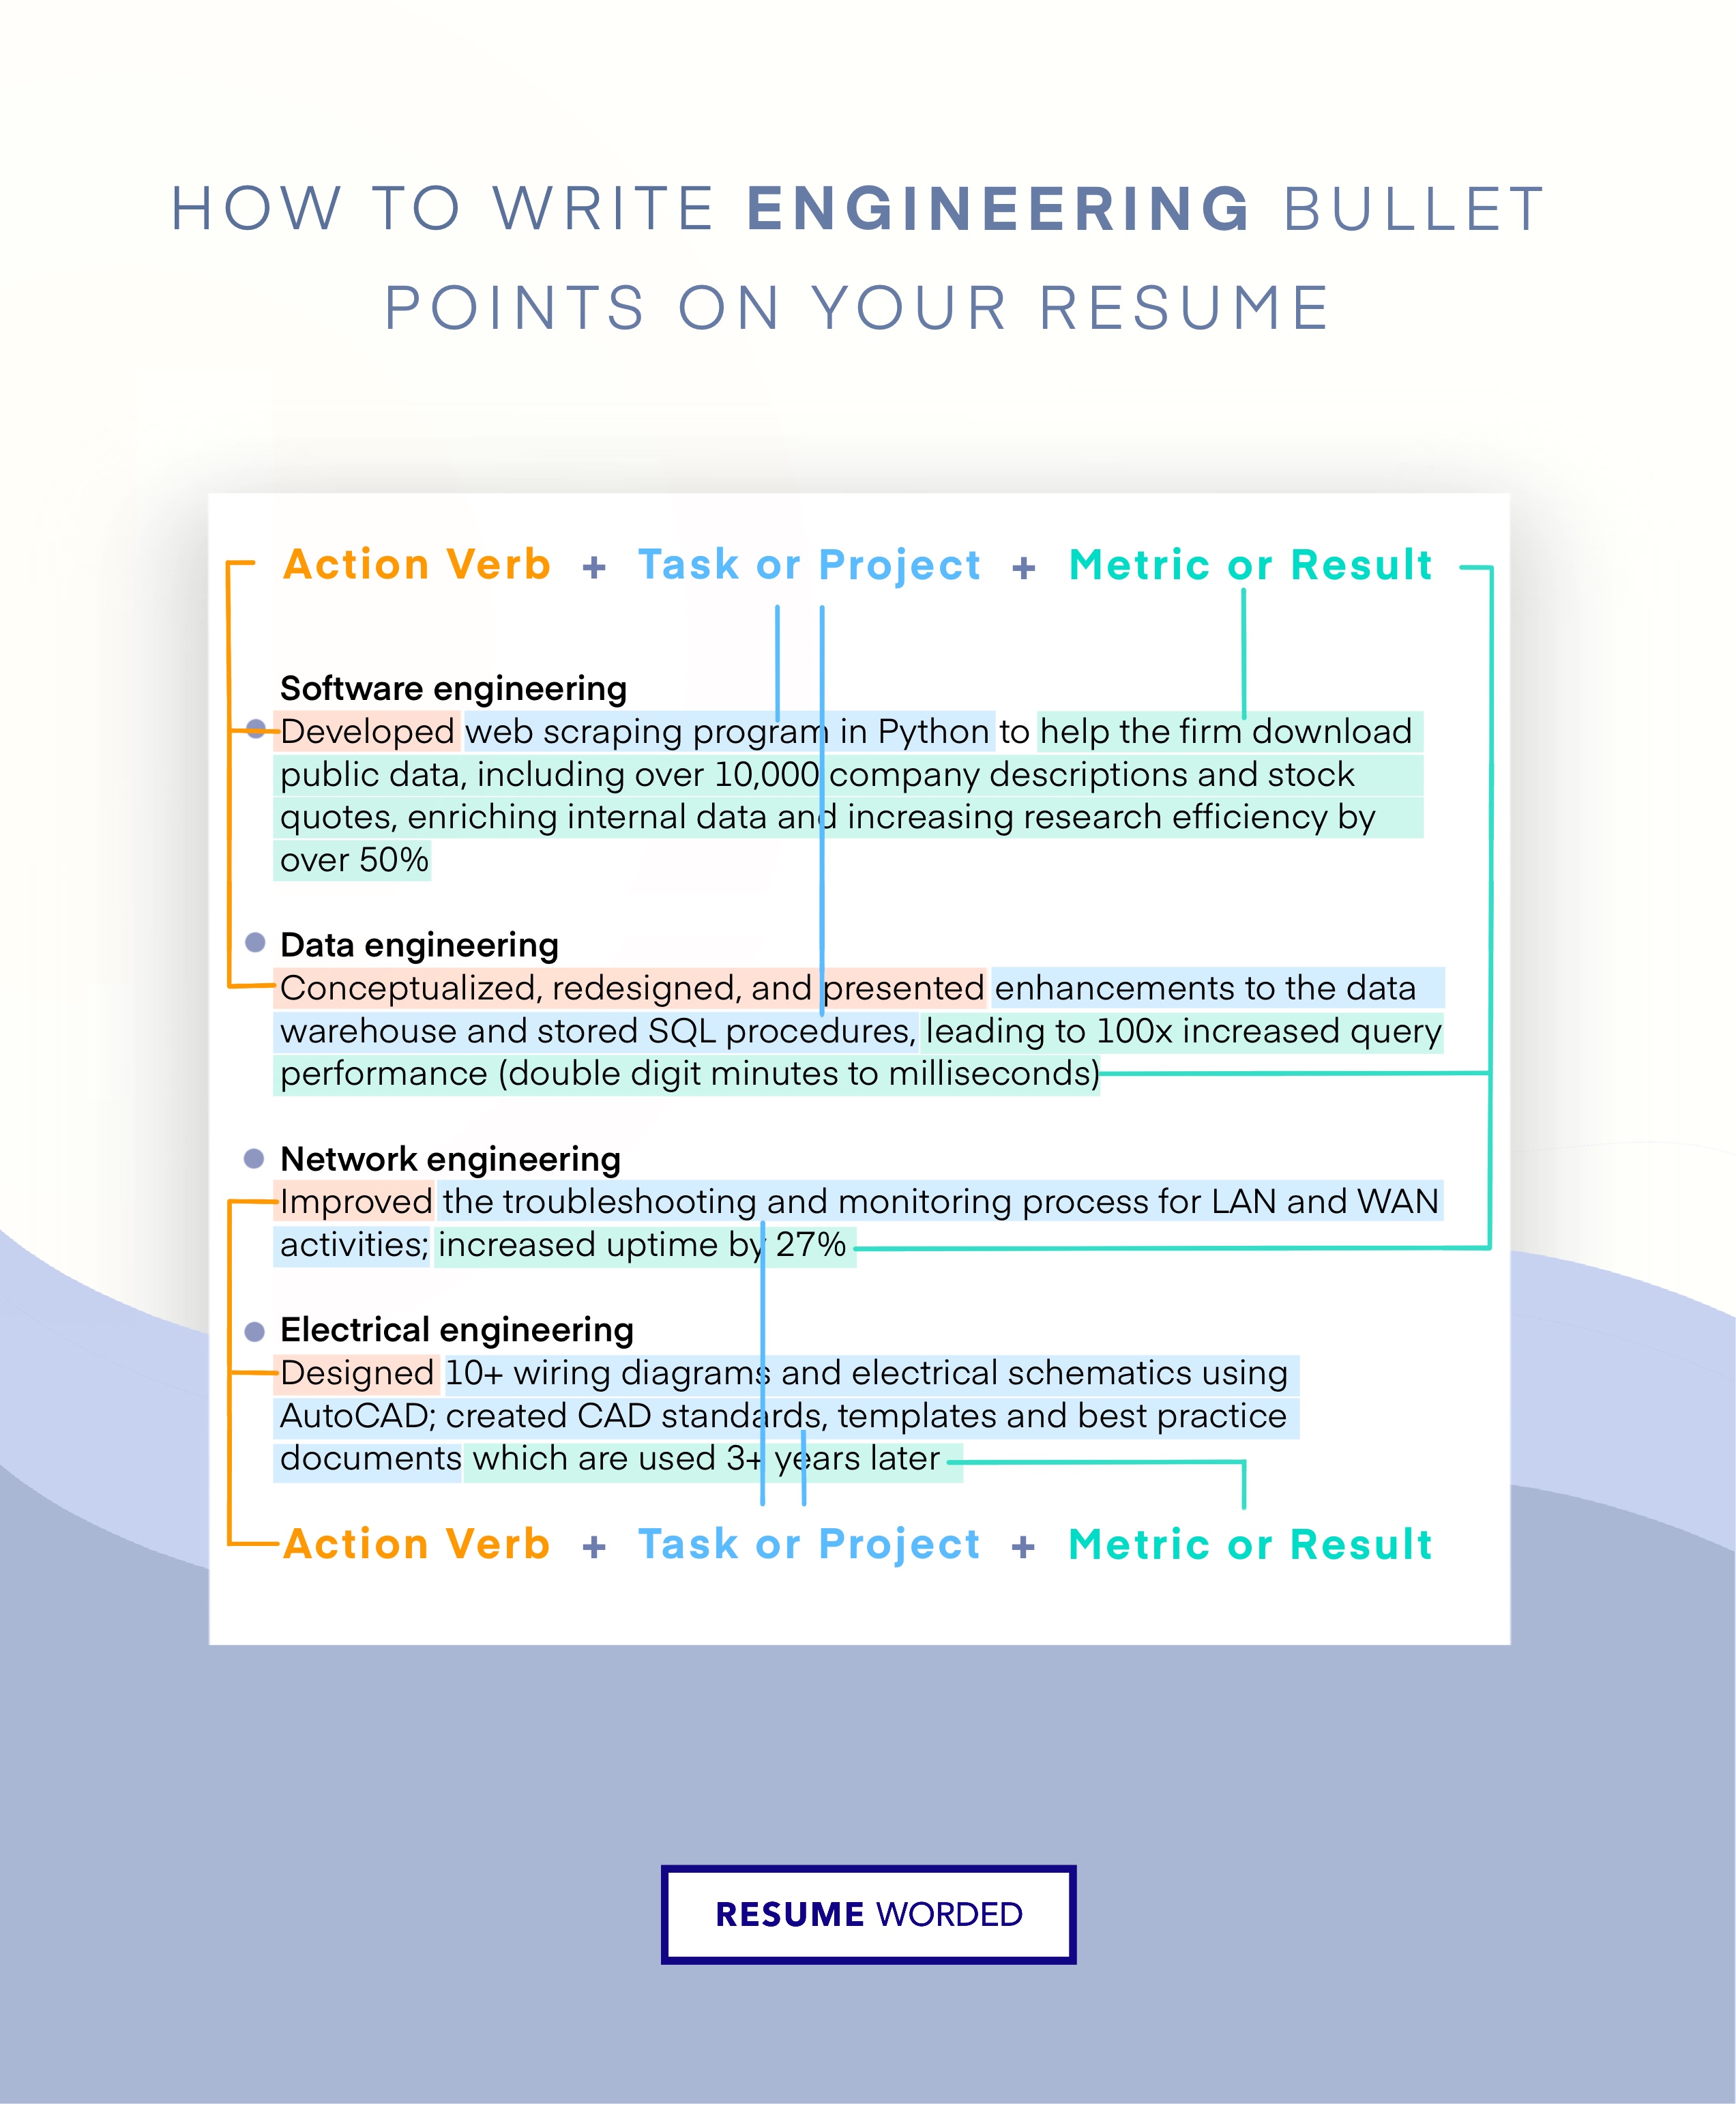 Emphasize your technical competencies - Technical Project Manager CV